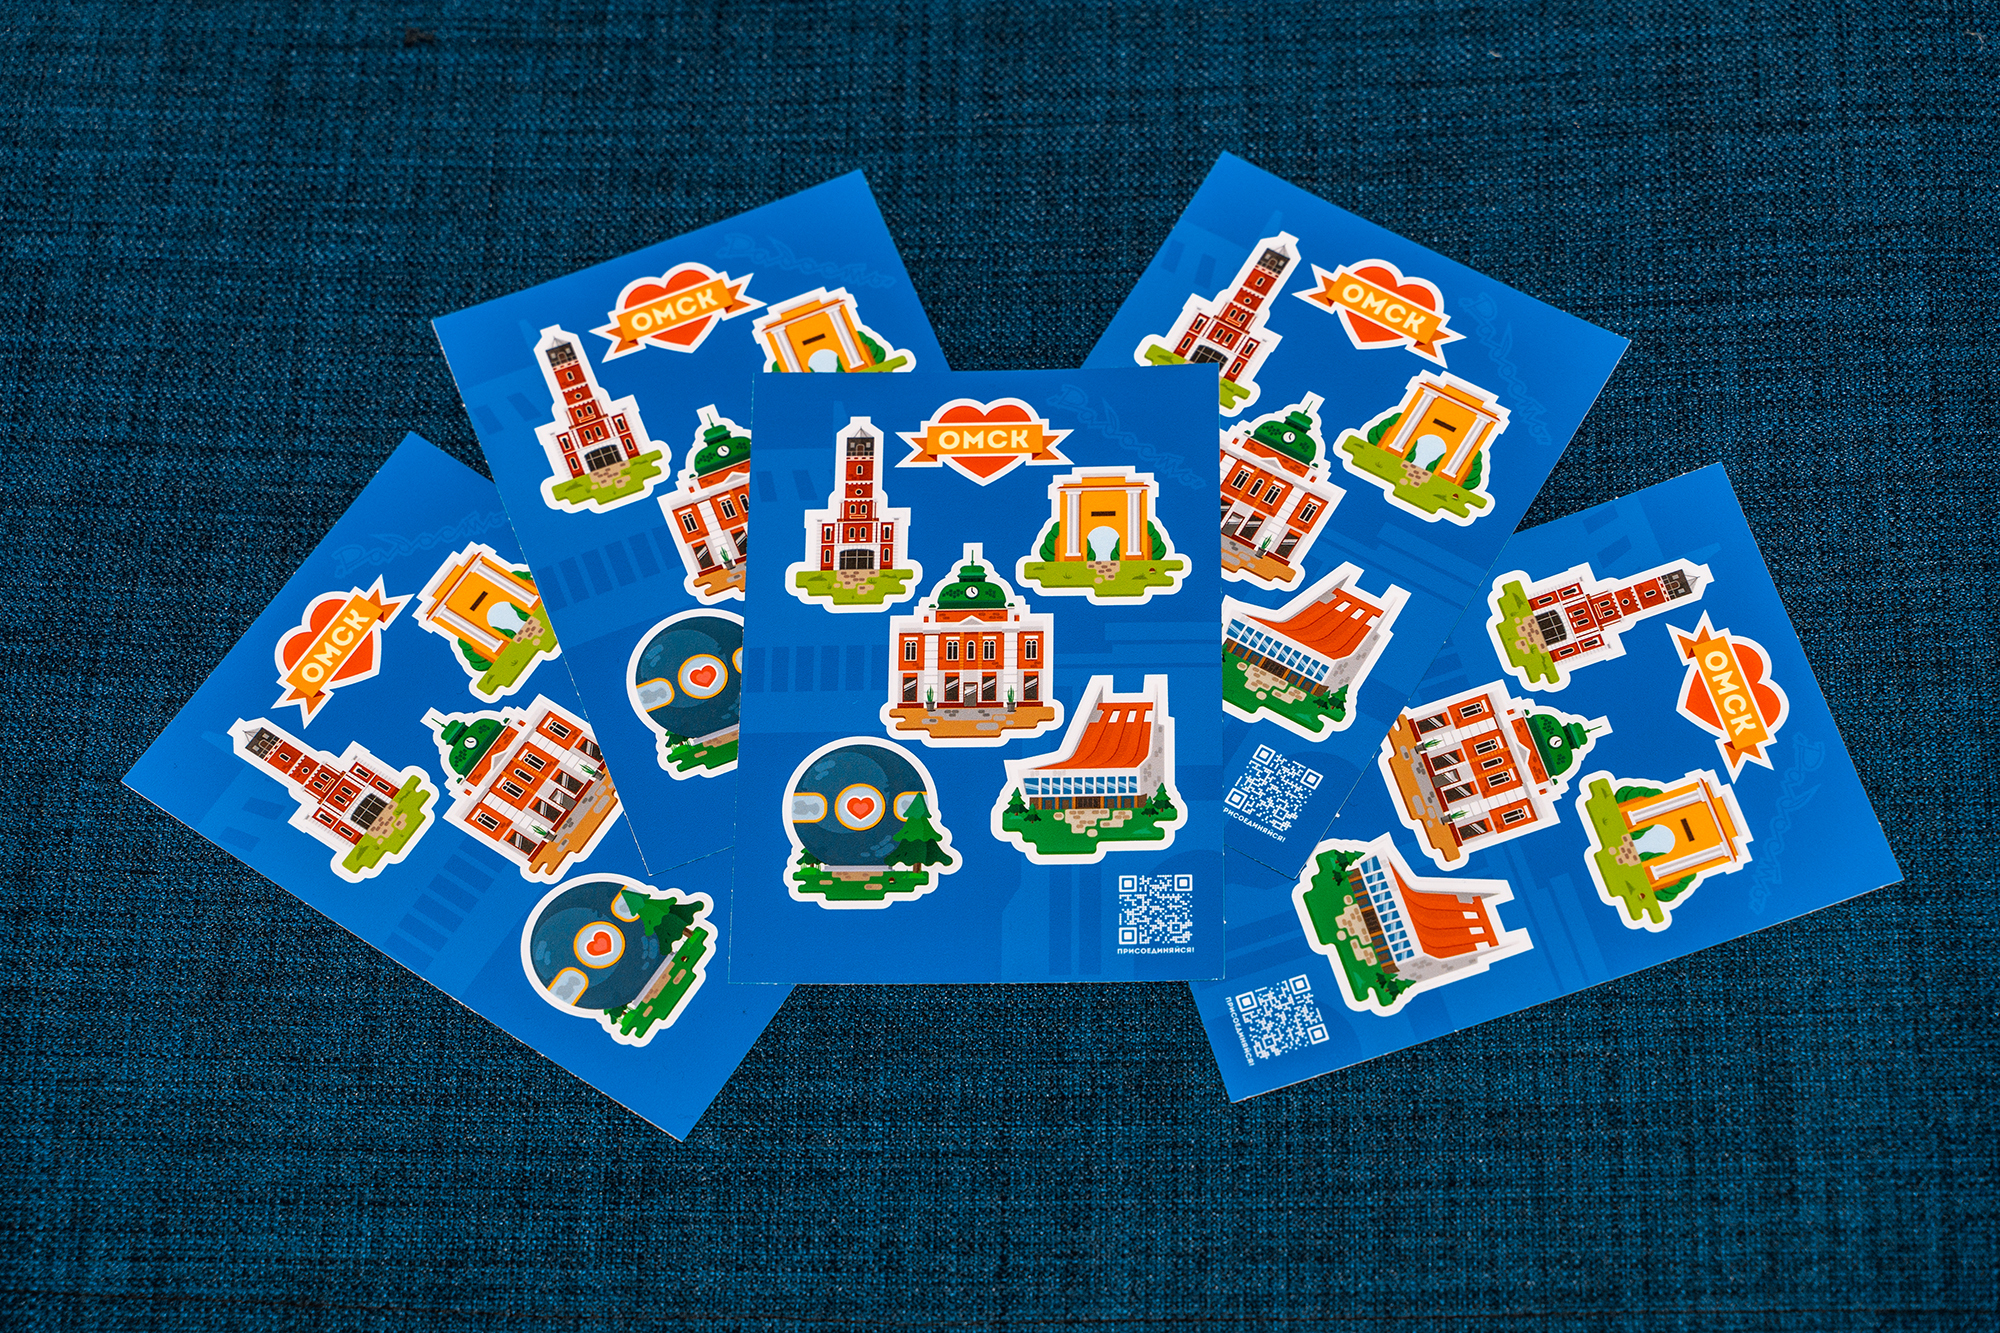 Sticker packs - Omsk - My, Russia, Tourism, Town, Omsk, Stickers, Souvenirs, Travel across Russia, sights, Туристы